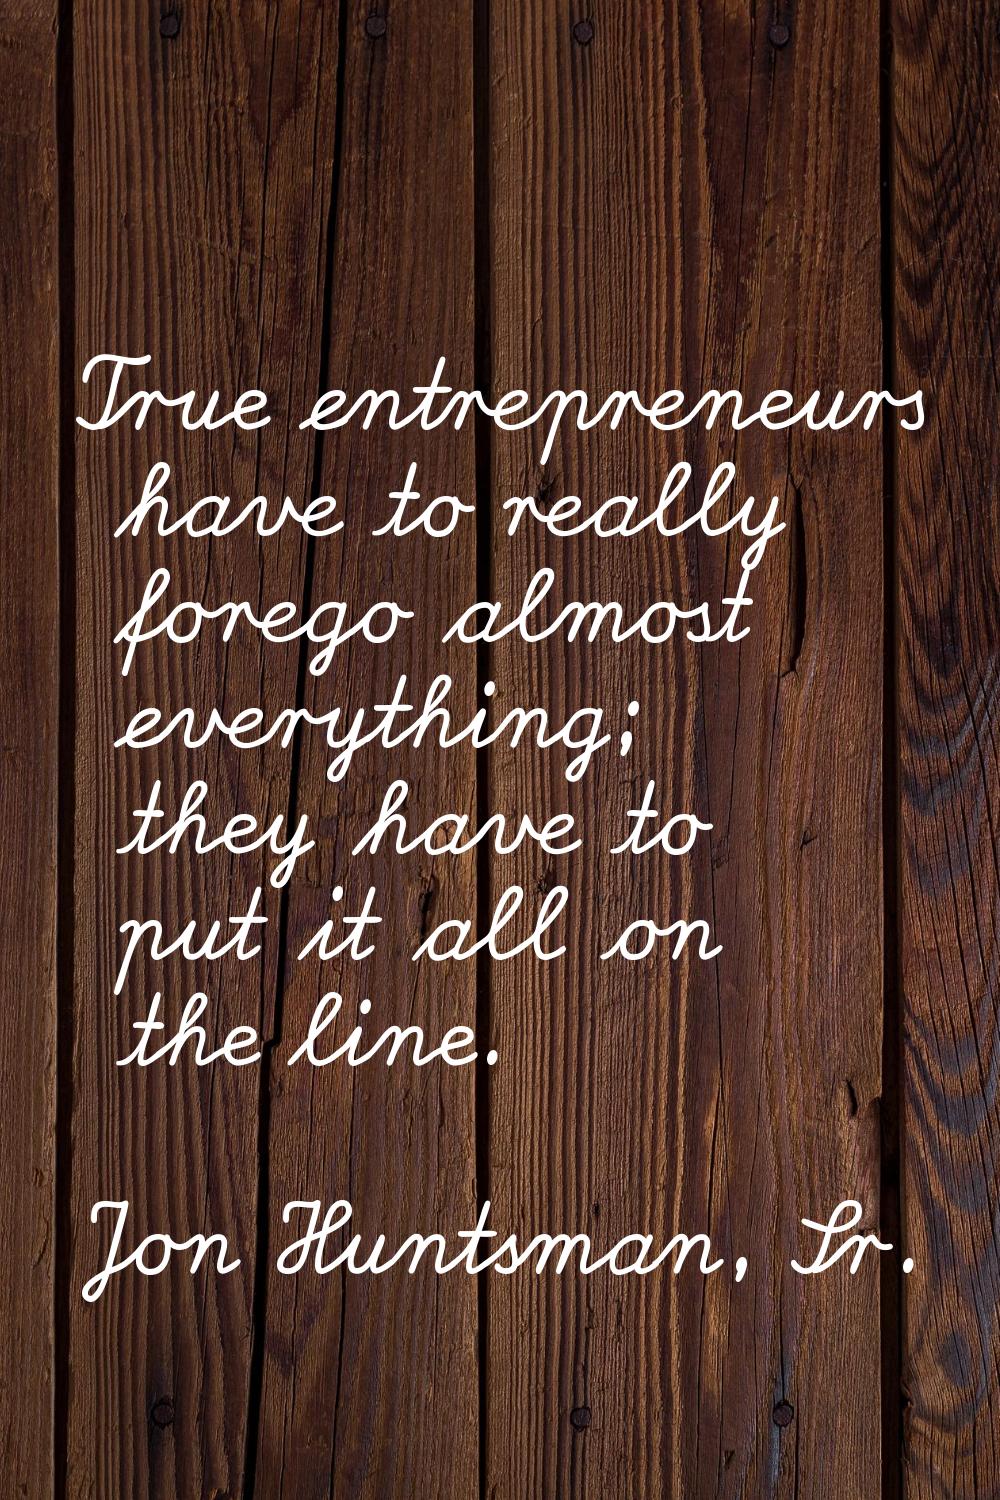 True entrepreneurs have to really forego almost everything; they have to put it all on the line.